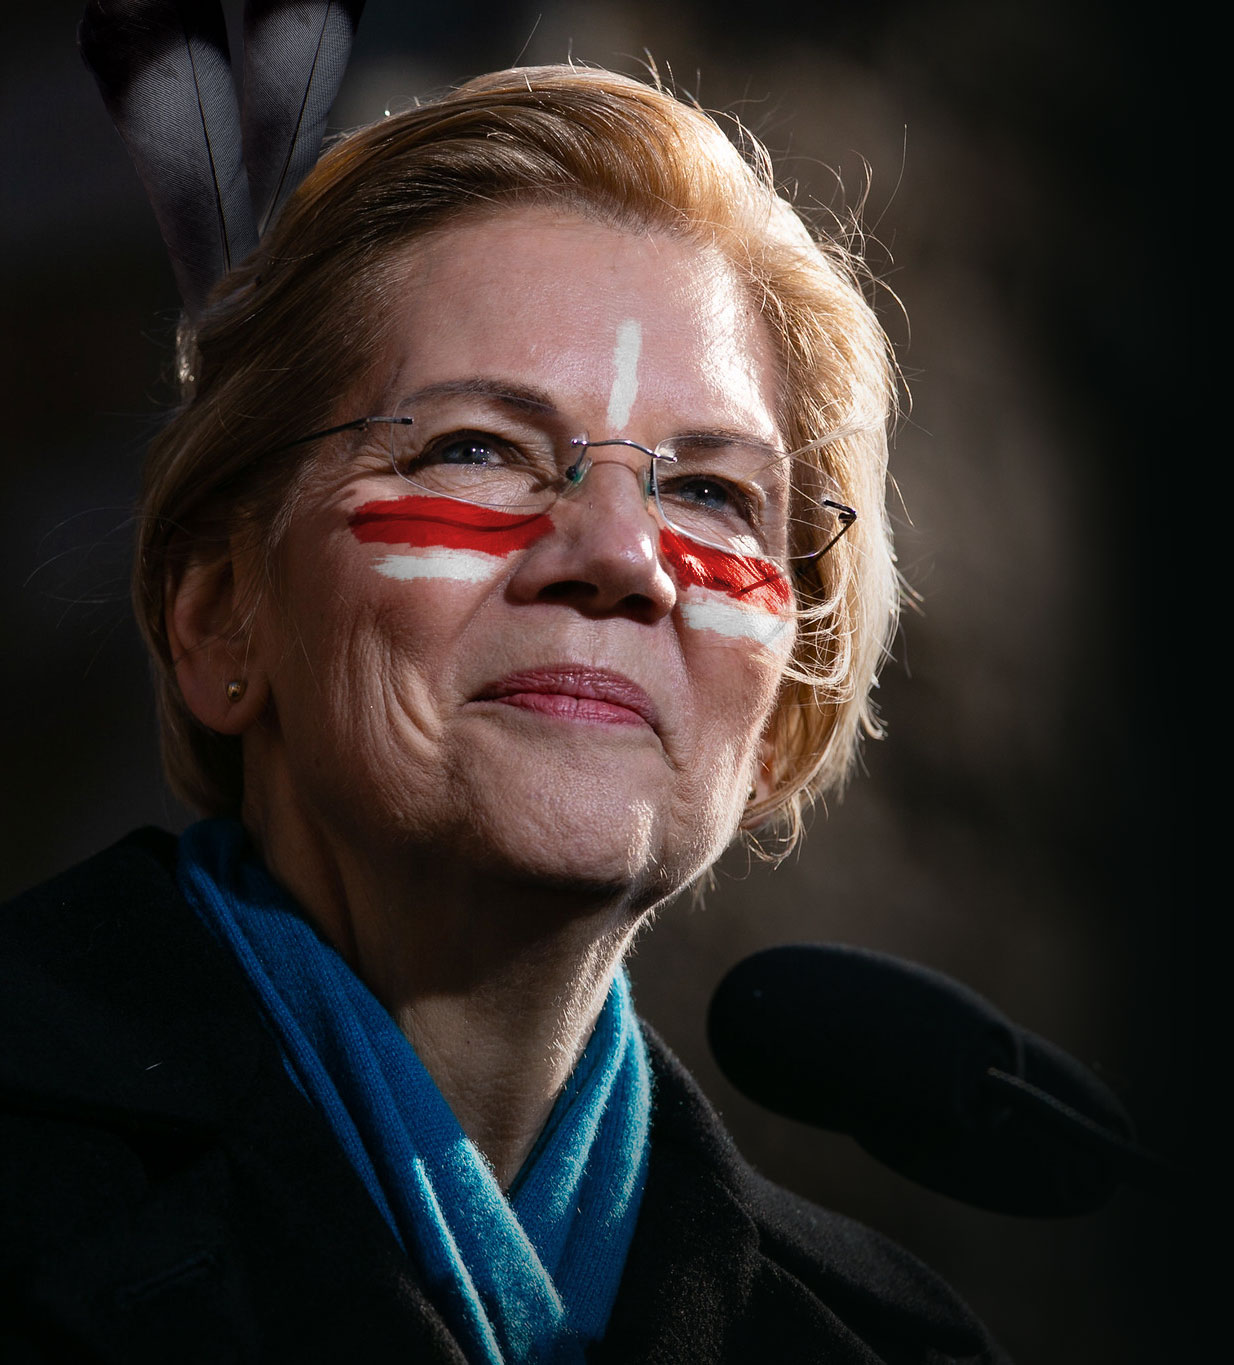 Elizabeth Warren for Commander in Chief or President 2020 with No Native American Heritage